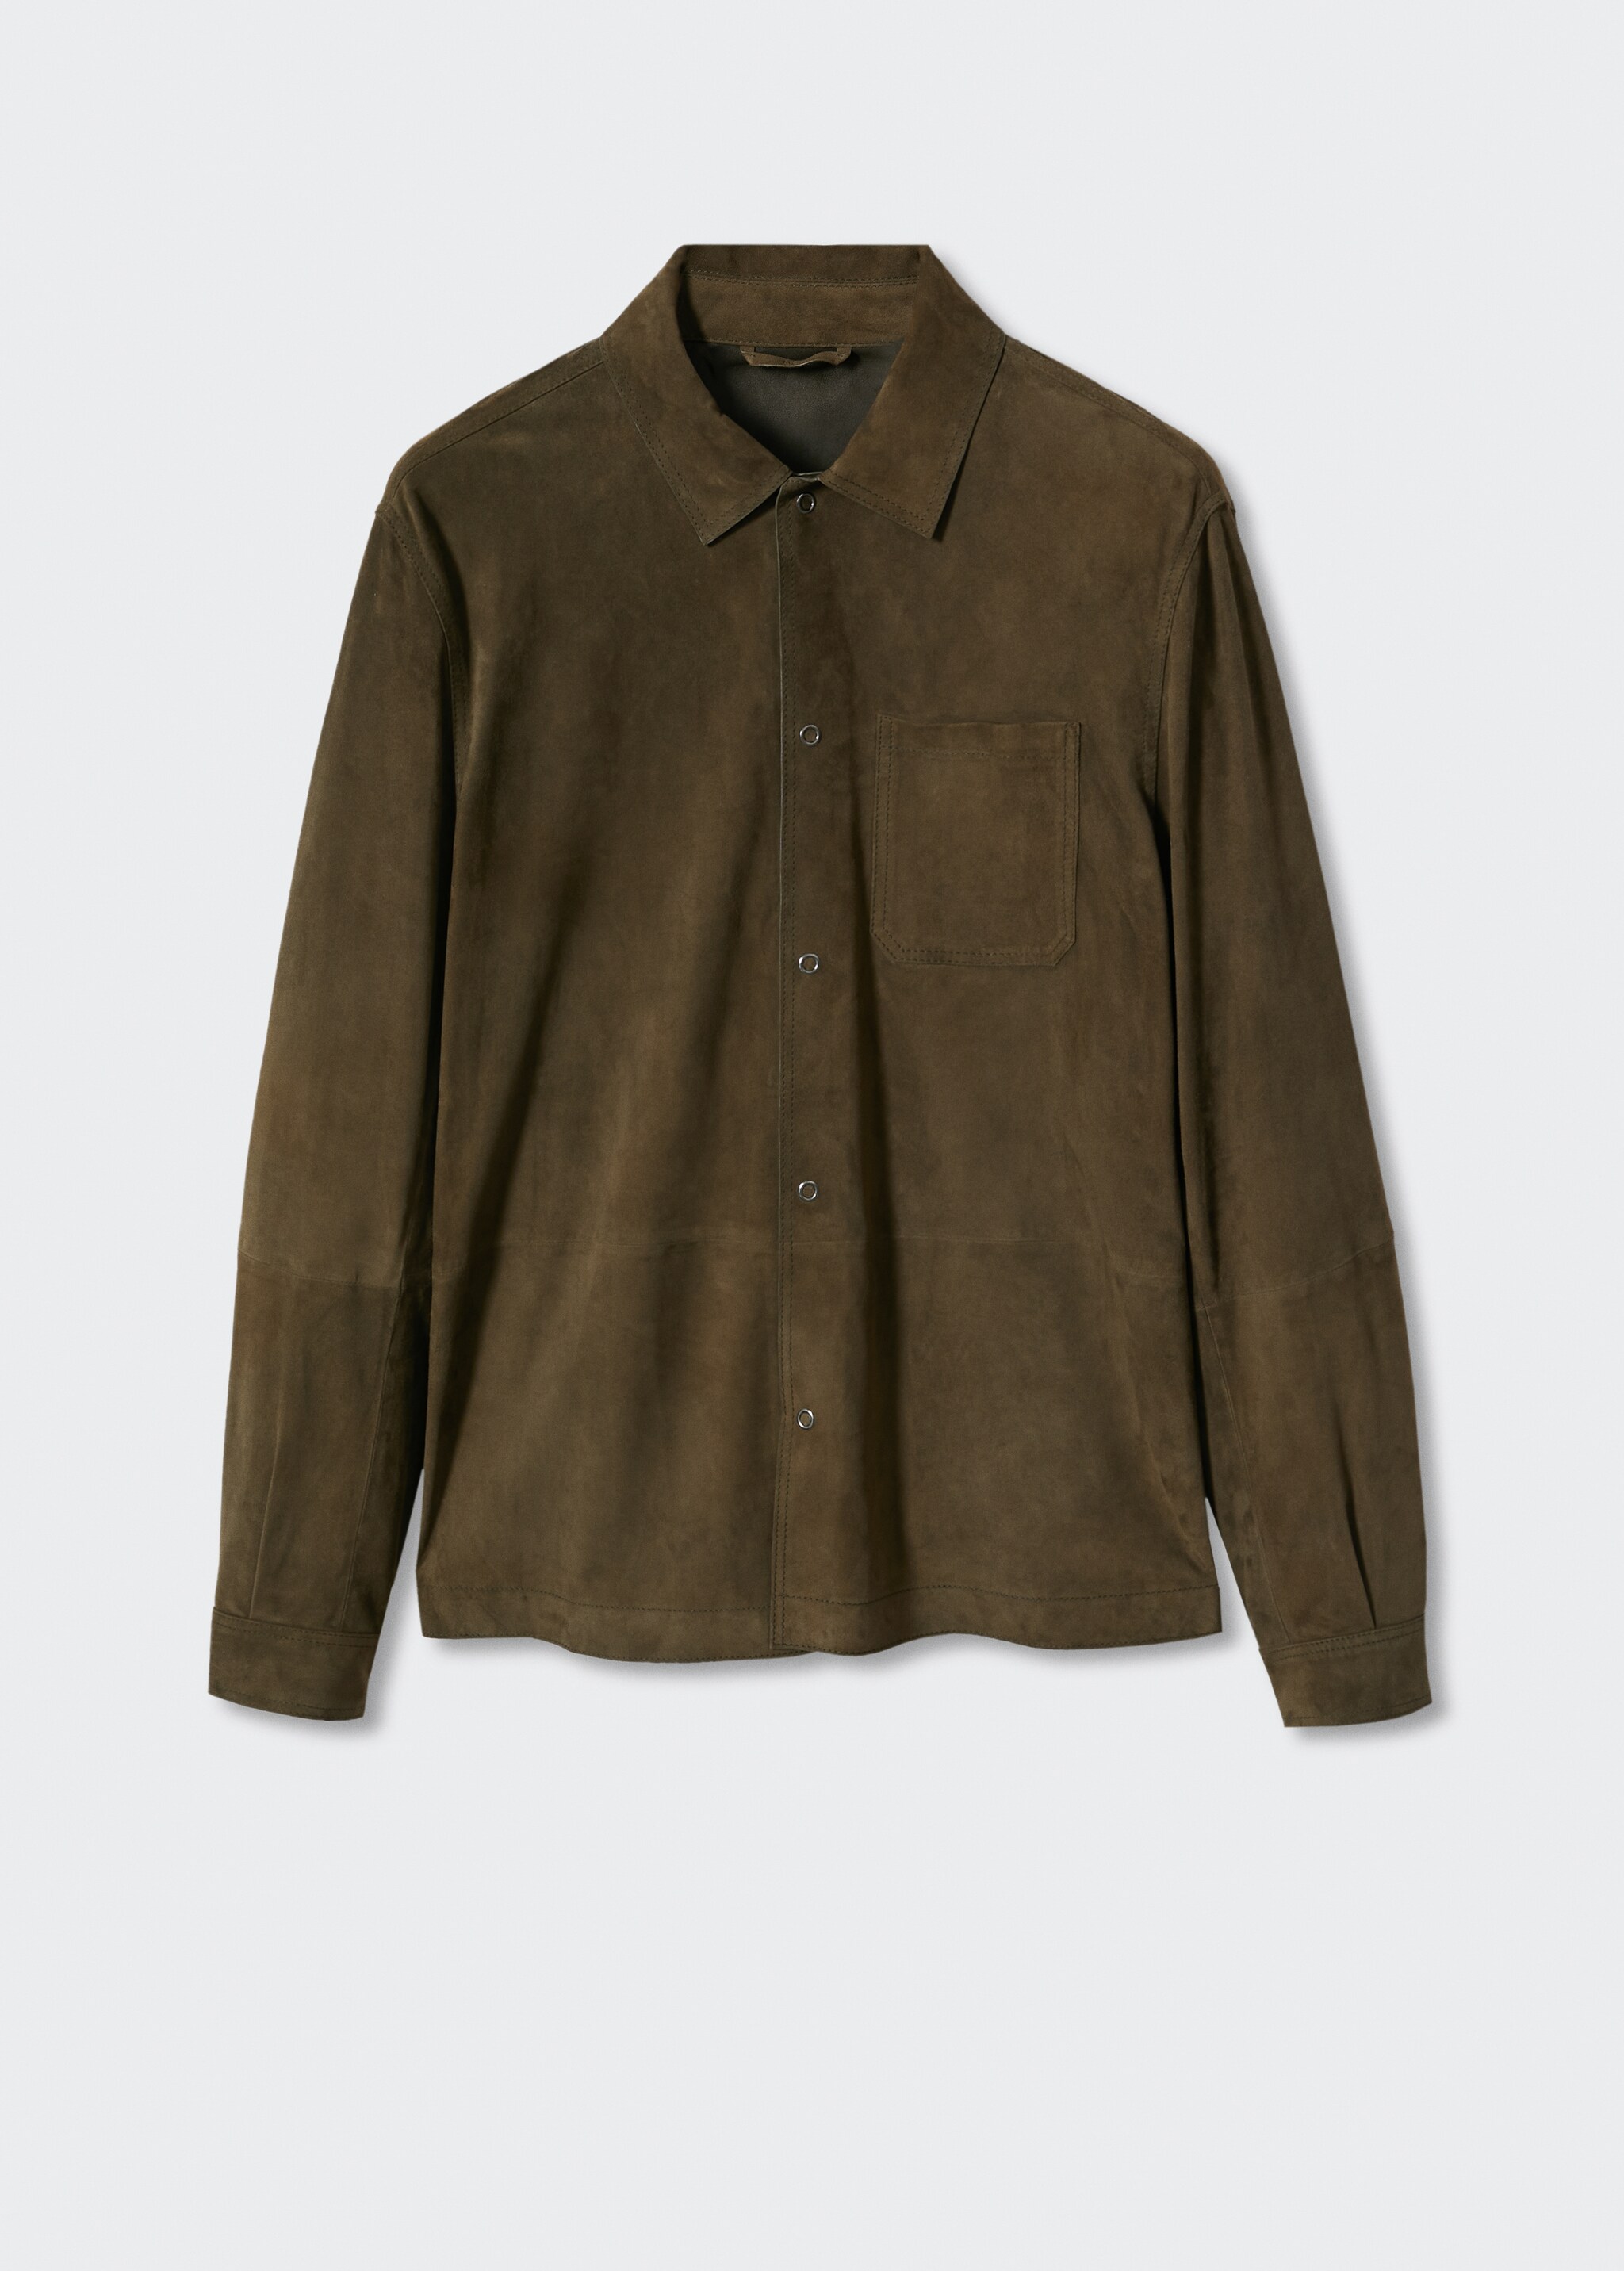 Pocket leather overshirt - Article without model